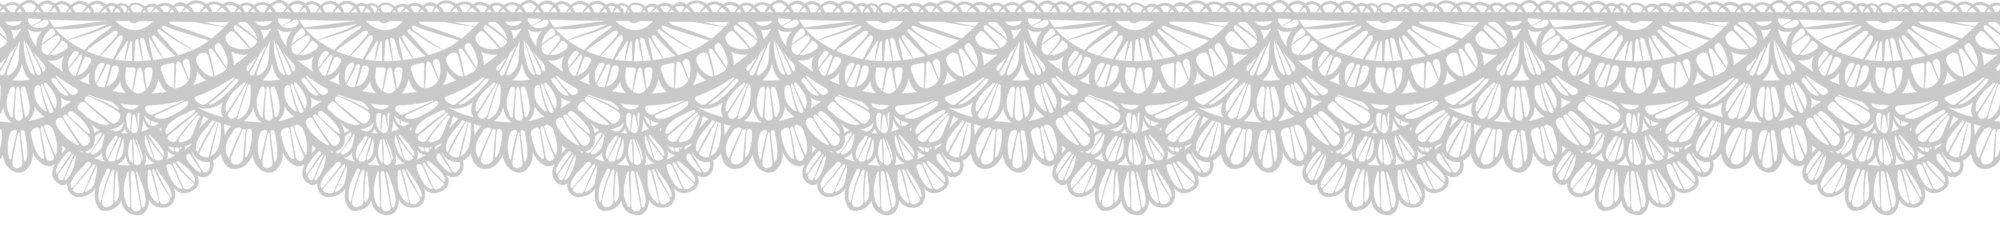 lace border png